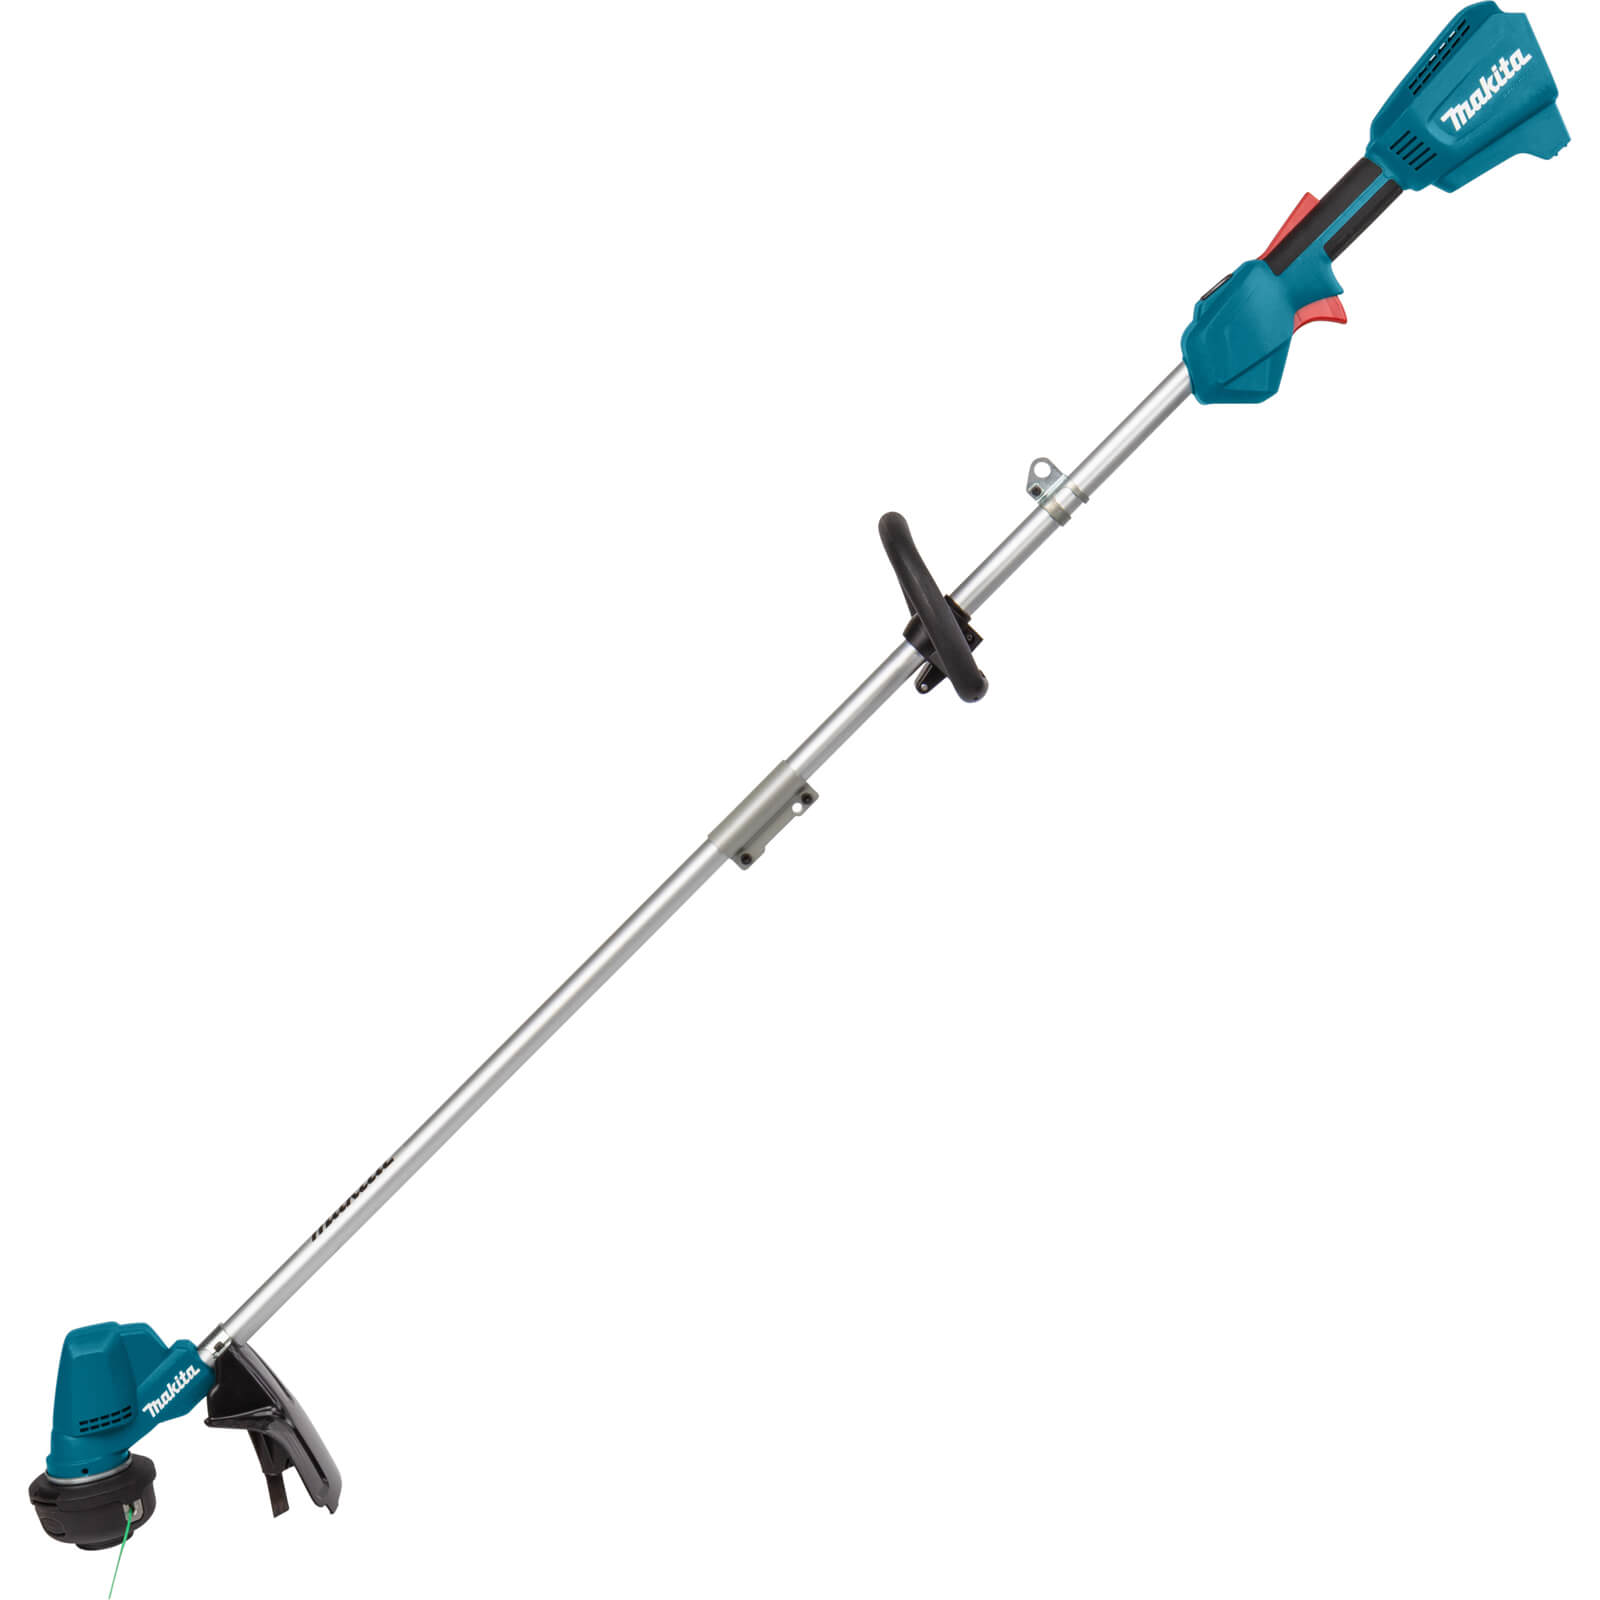 Image of Makita DUR192L 18v LXT Cordless Brushless Grass Trimmer 300mm No Batteries No Charger